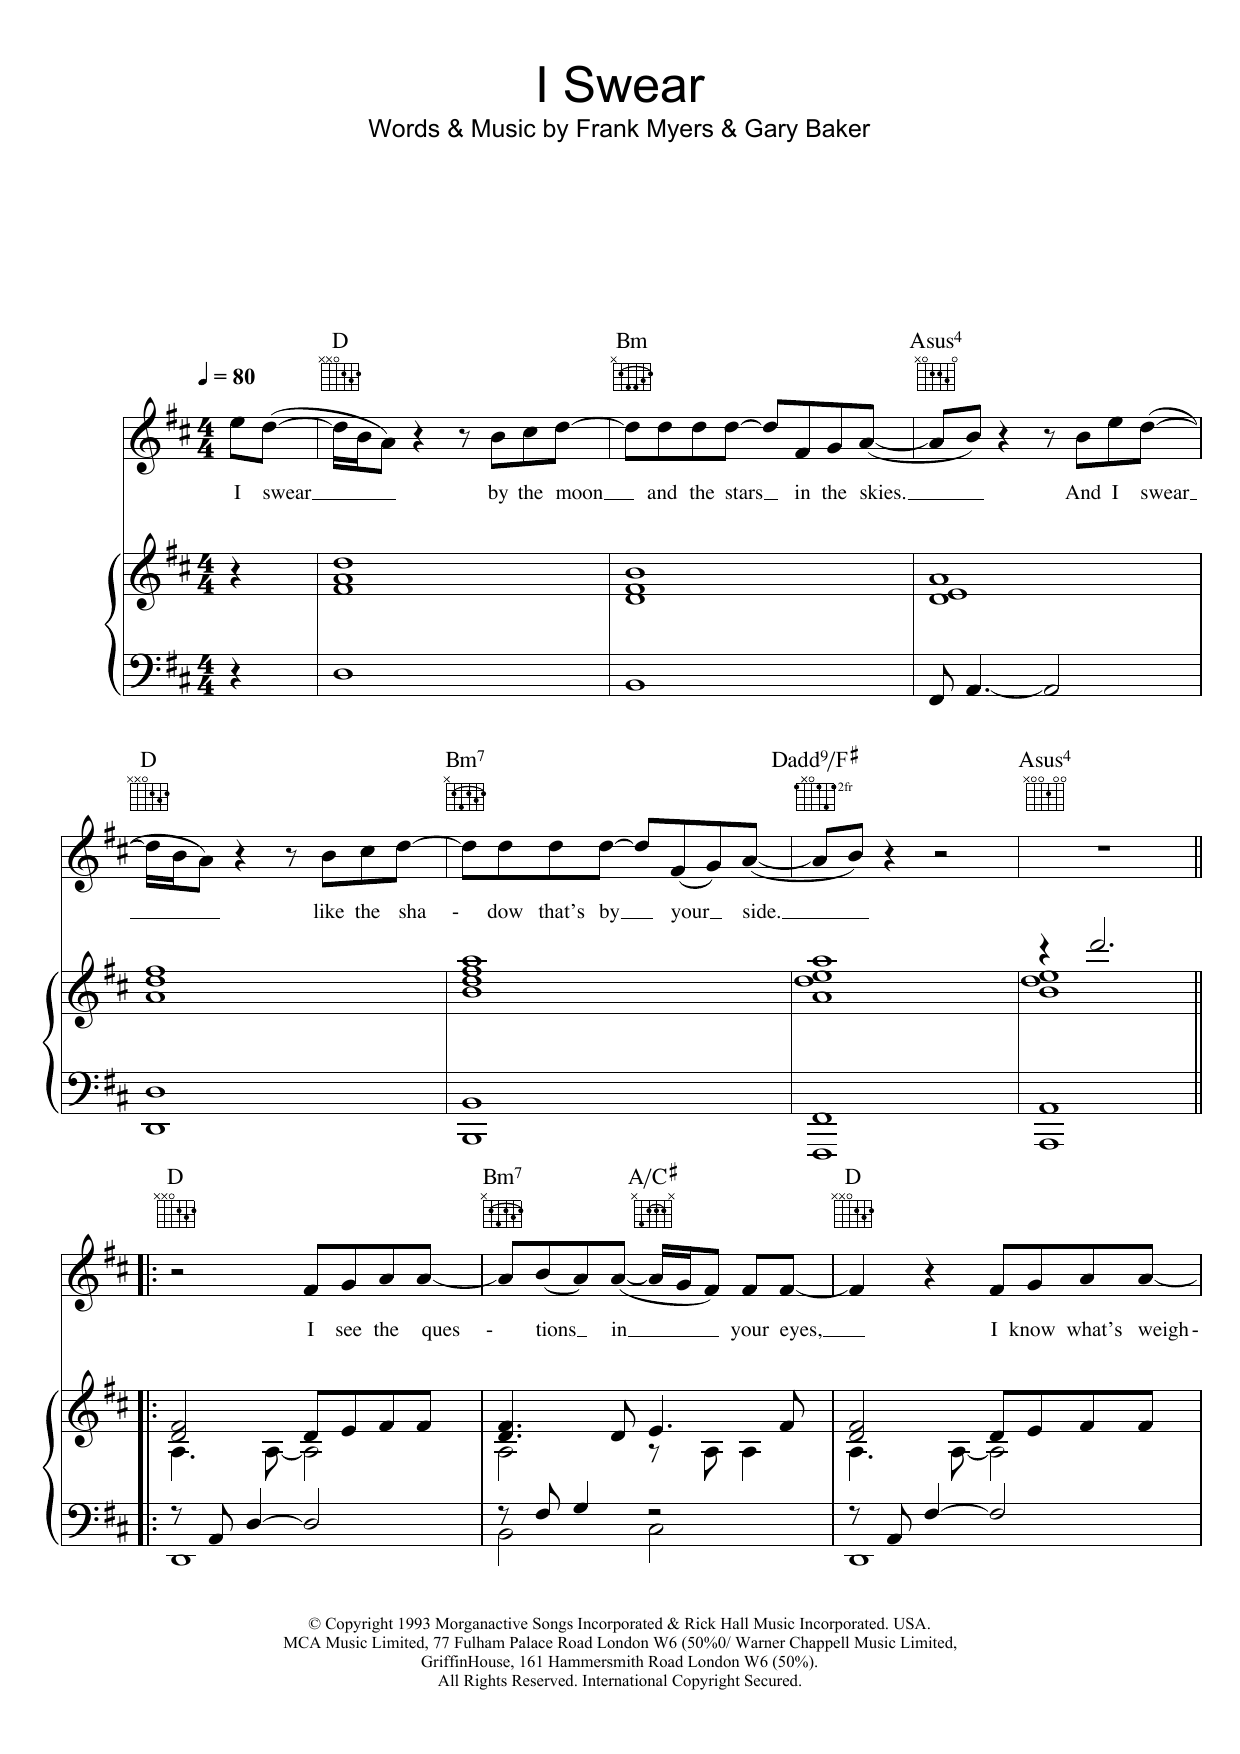 All-4-One I Swear sheet music notes printable PDF score